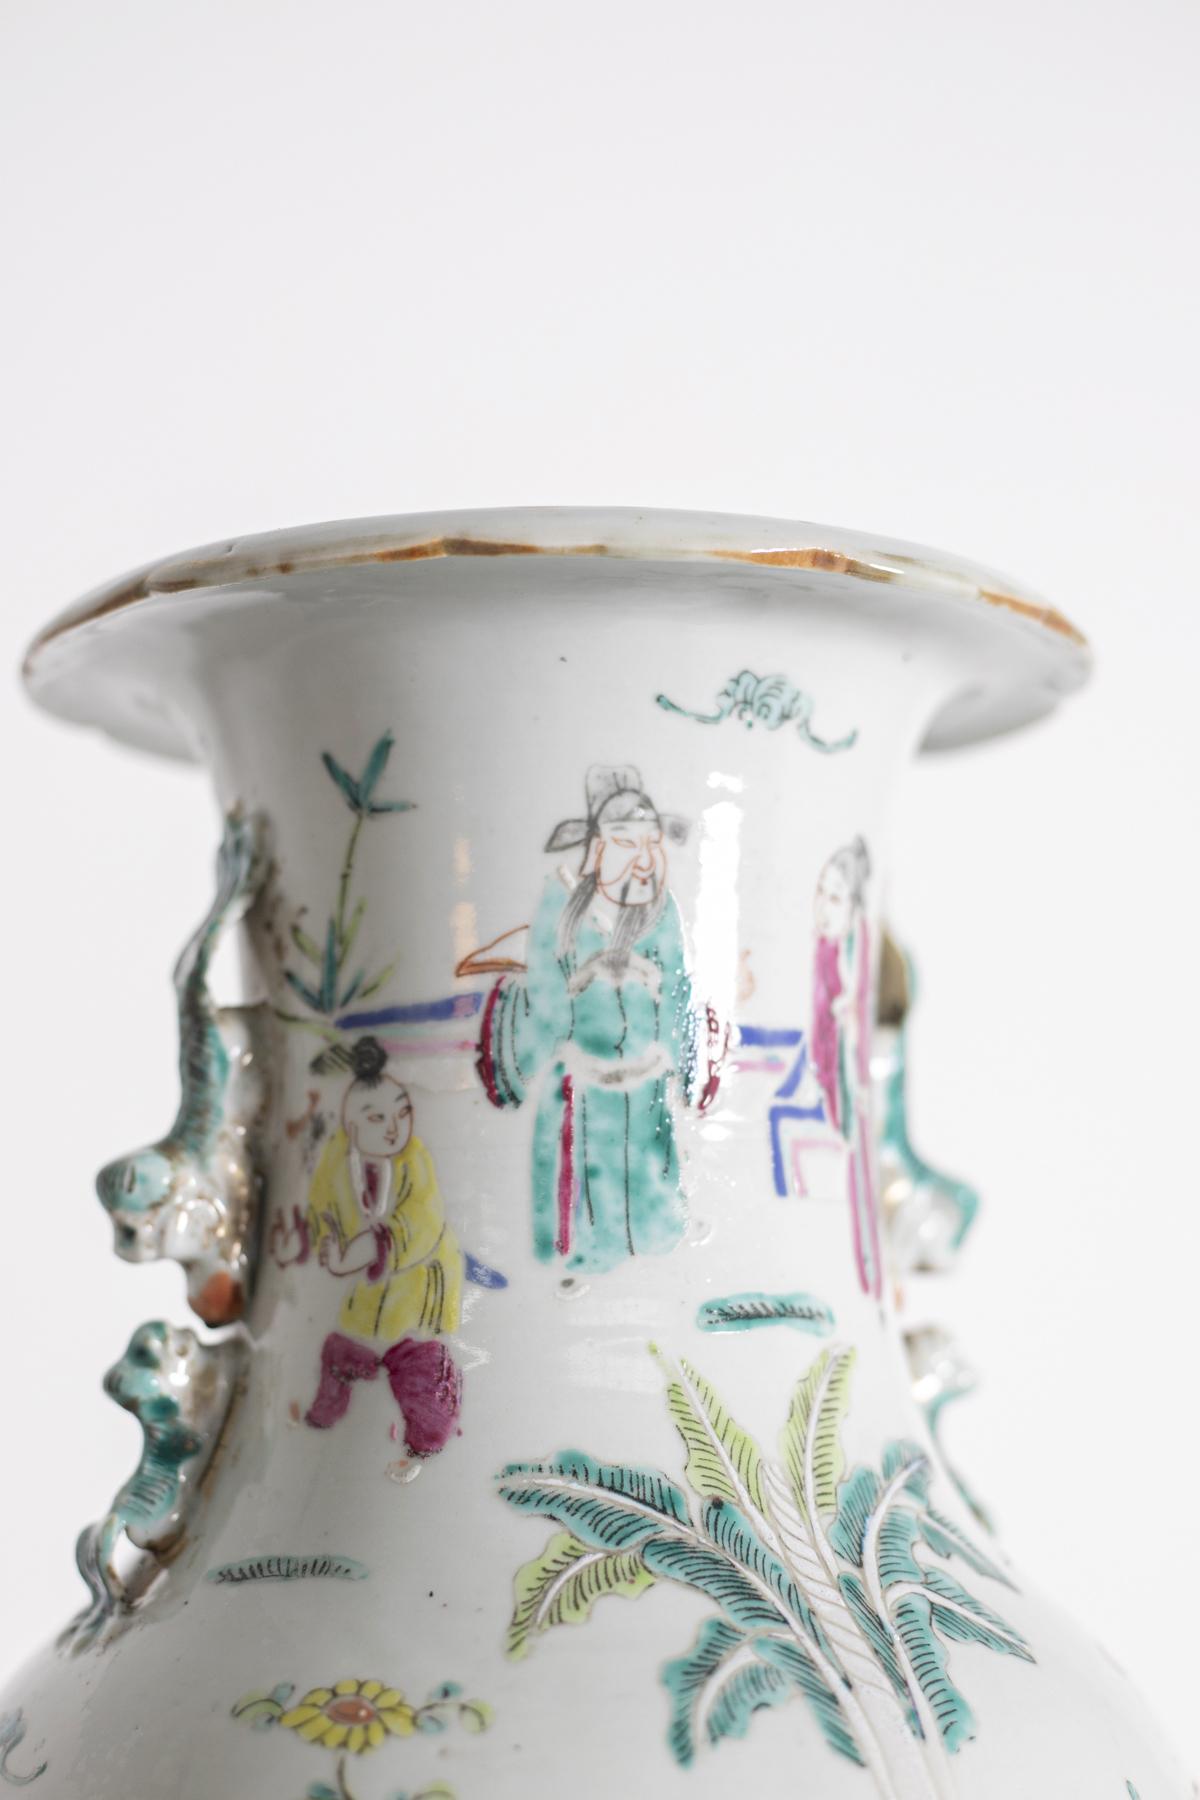 Antique Chinese porcelain vase from the period of the rose family. On the surface there is a scene of everyday life probably inside the royal palace and its surrounding garden. This type of representation is very common in this period, through the